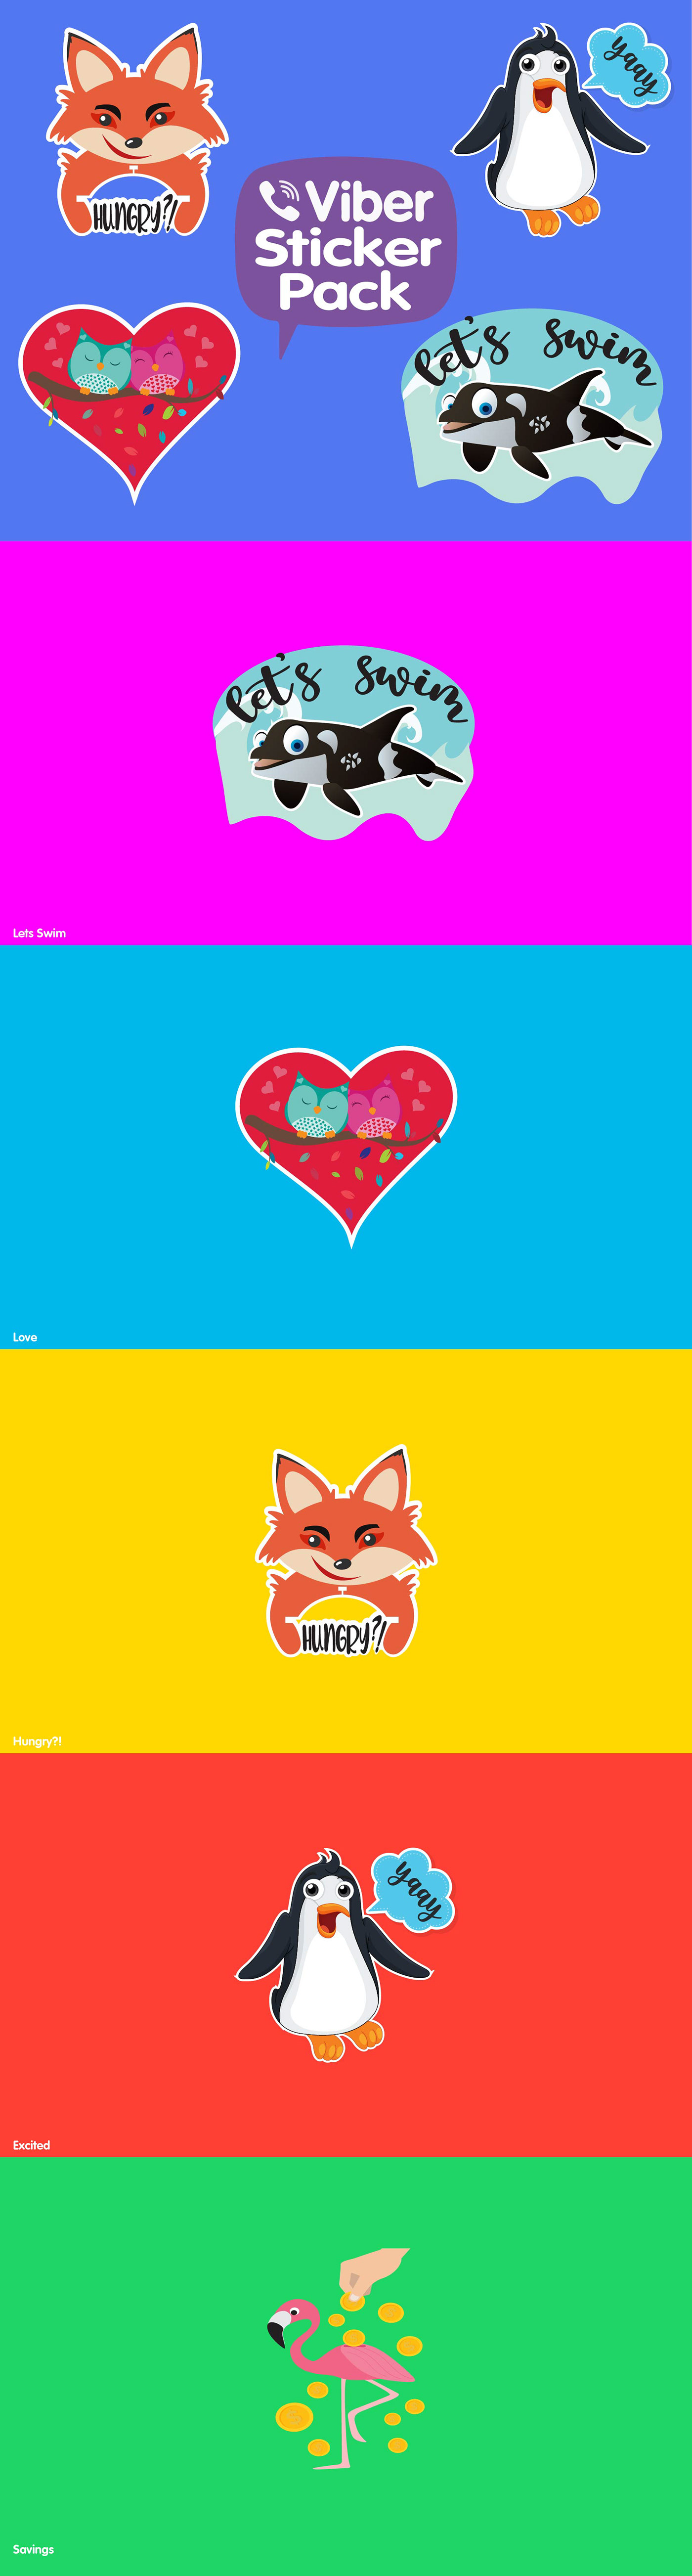 cartoon characters CharactersDesign creative design graphicdesign Pack sticker stickers viber